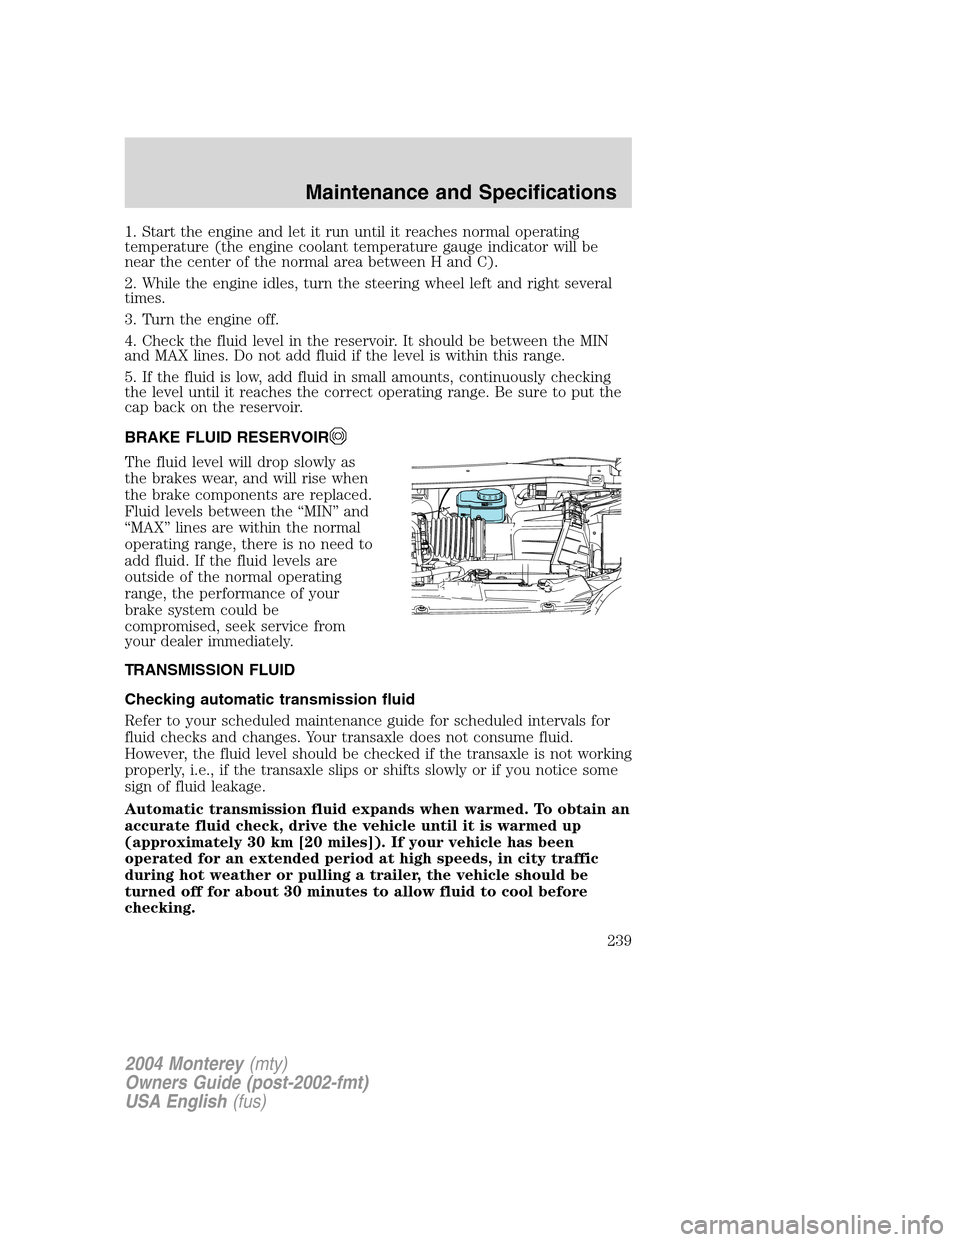 Mercury Monterey 2004  Owners Manuals 1. Start the engine and let it run until it reaches normal operating
temperature (the engine coolant temperature gauge indicator will be
near the center of the normal area between H and C).
2. While t